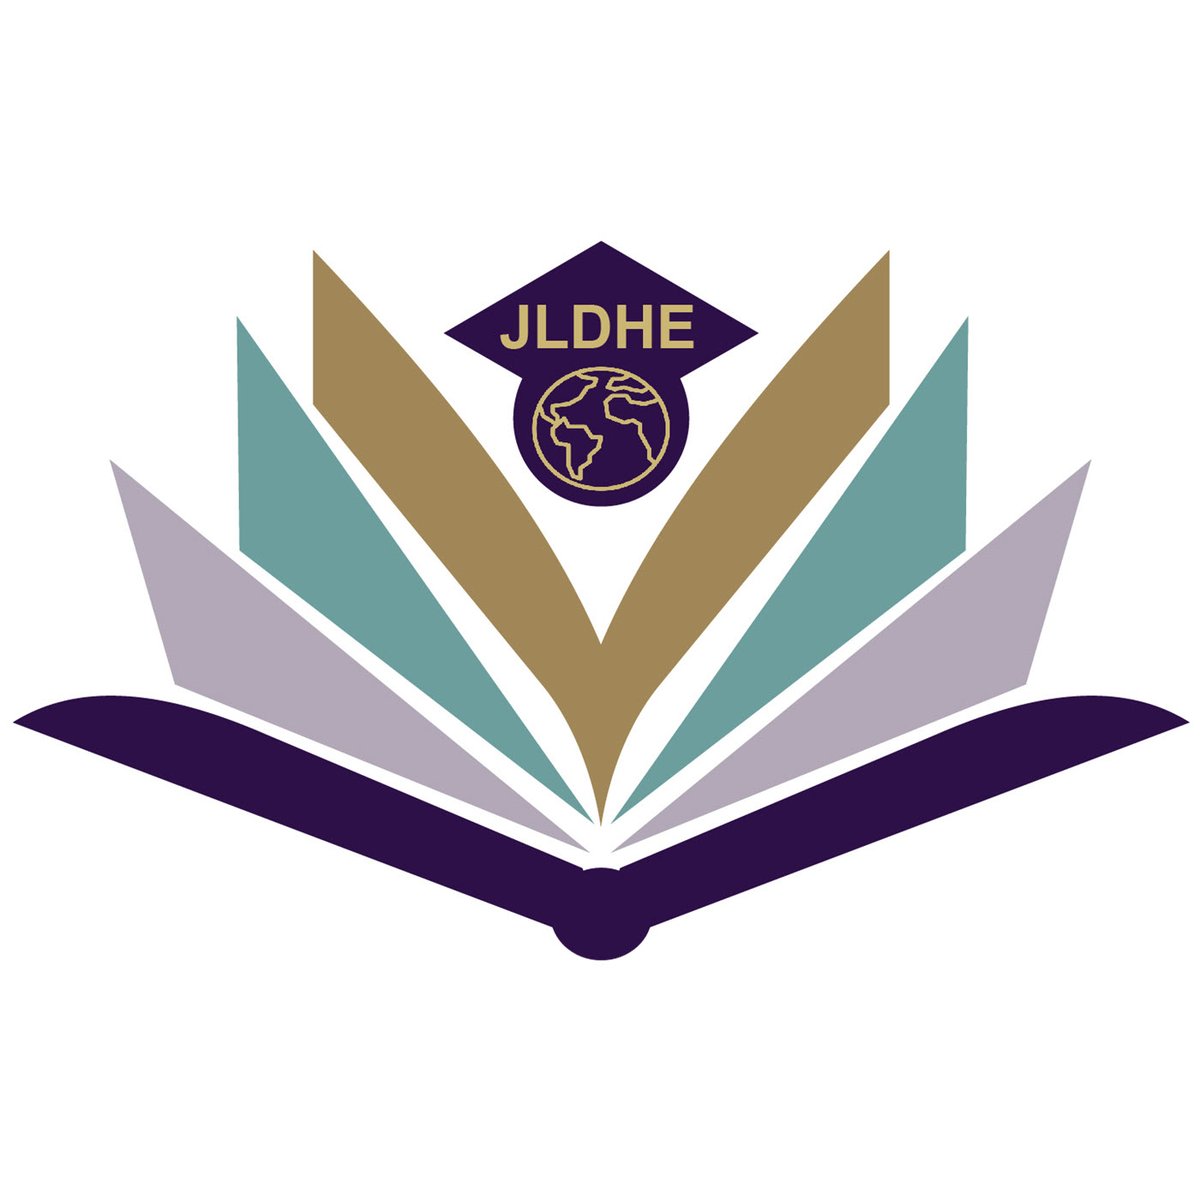 JLDHE is aimed at those interested in how learning is facilitated & experienced by HE students. We publish papers from various authors whose practice aligns with Learning Development's (LD) values. Find out more & make a submission: journal.aldinhe.ac.uk #LoveLD